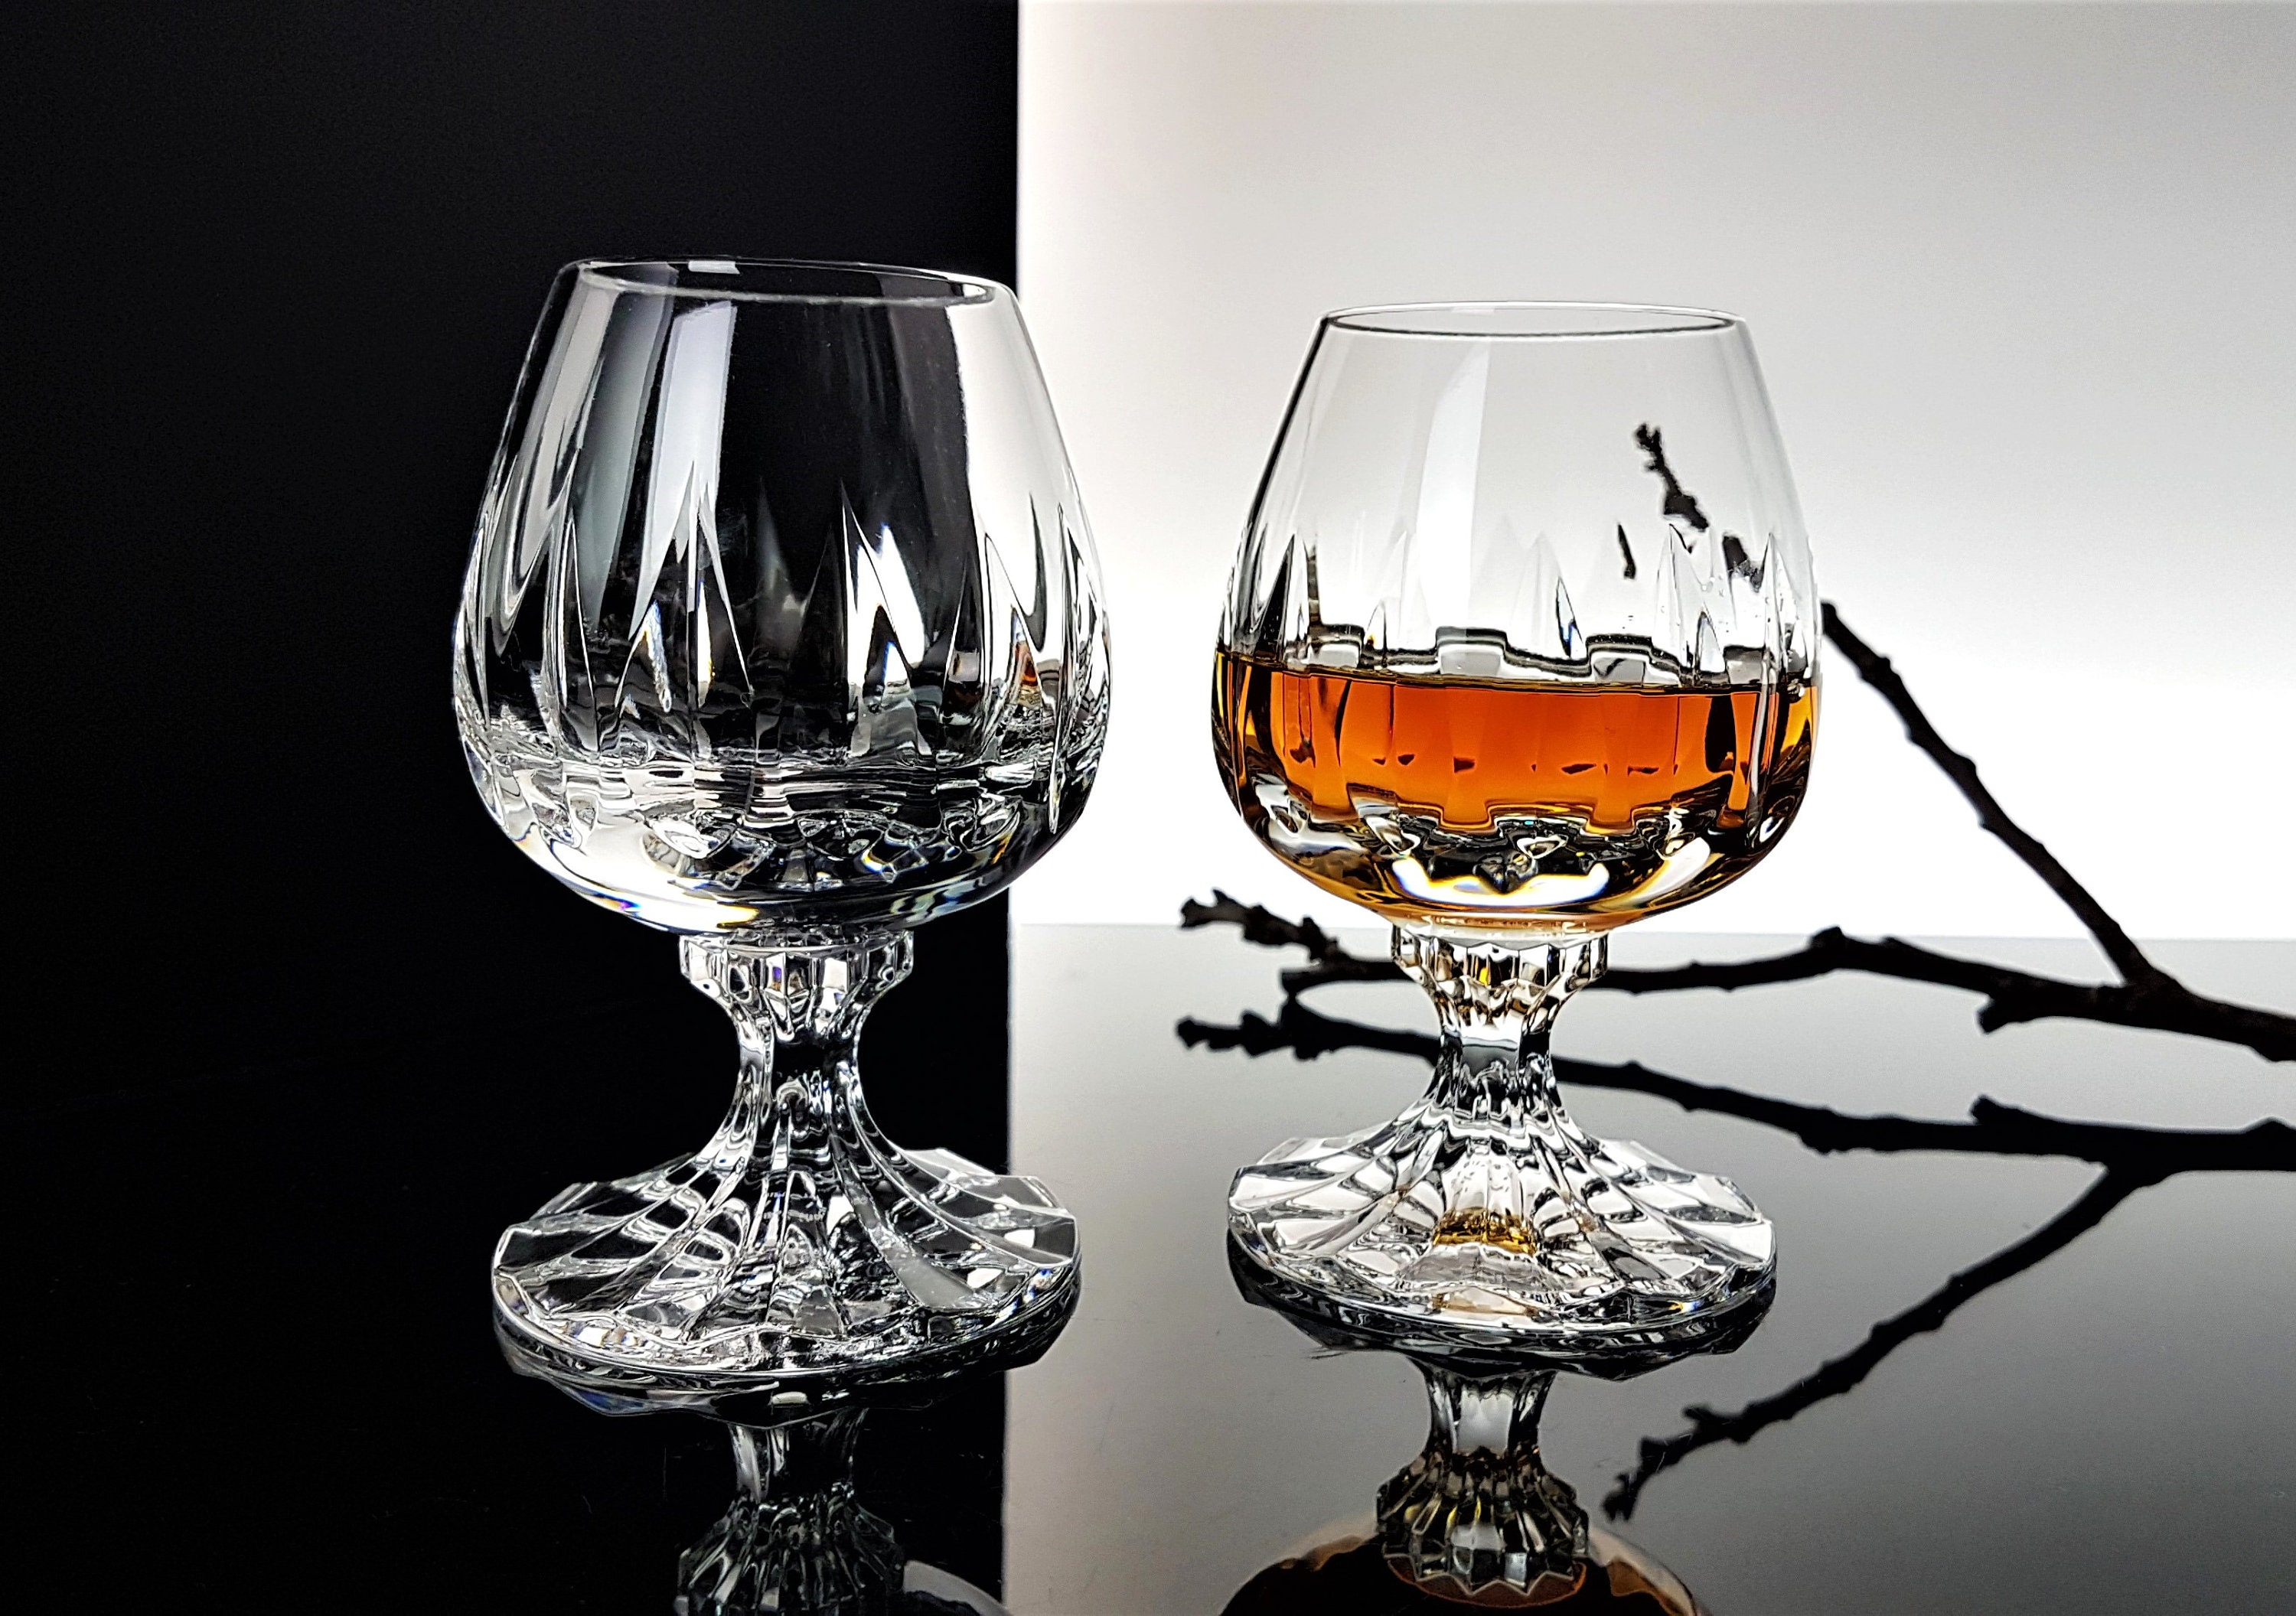 Crystal - Sherry - Brandy - Cognac - Snifter - Glasses - Set of 6 -  Handcrafted - Crystal Glass - Great for Spirits - Drinks - Bourbon - Wine -  11